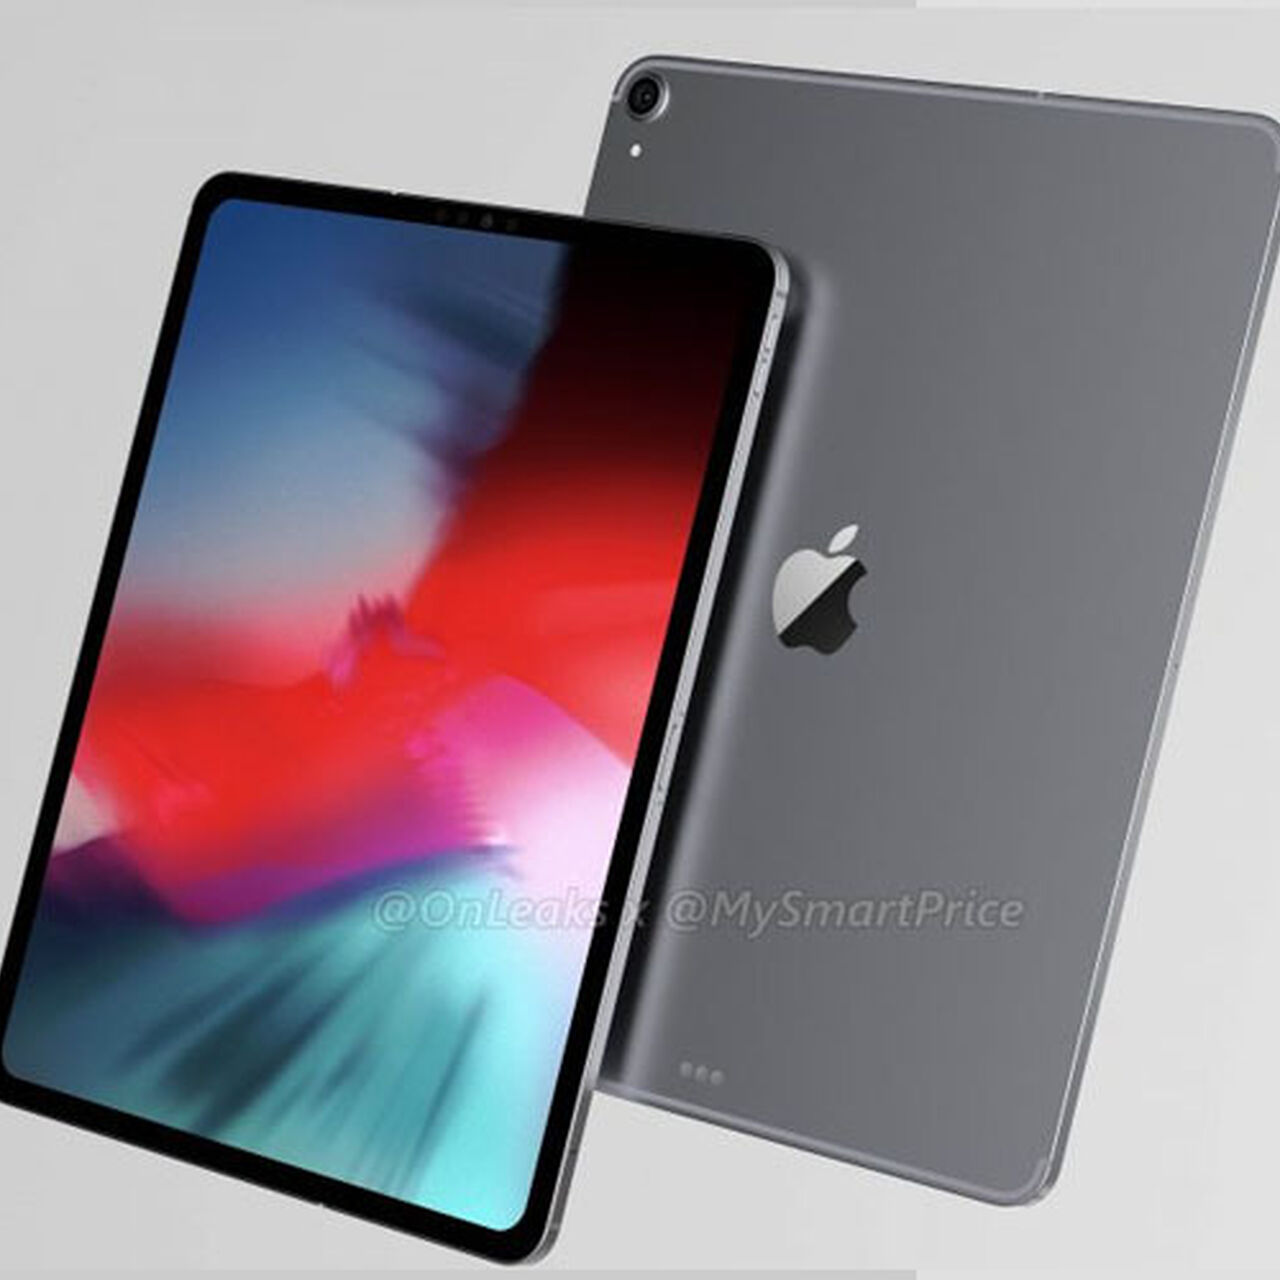 The leaked iPad Pro 2018: no notch, but with reduced frames